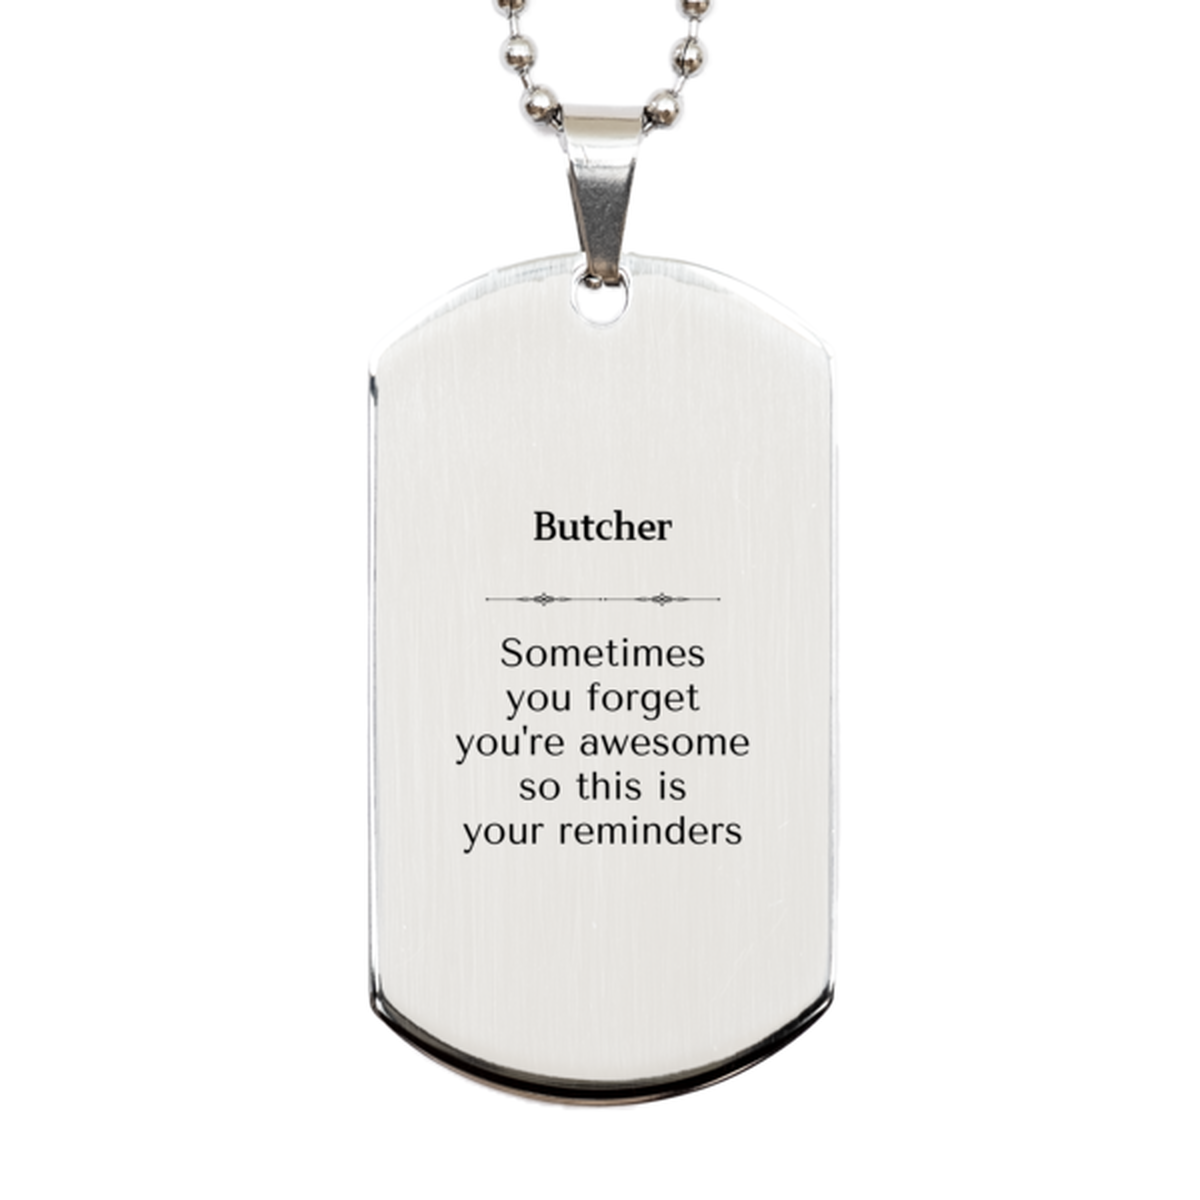 Sentimental Butcher Silver Dog Tag, Butcher Sometimes you forget you're awesome so this is your reminders, Graduation Christmas Birthday Gifts for Butcher, Men, Women, Coworkers